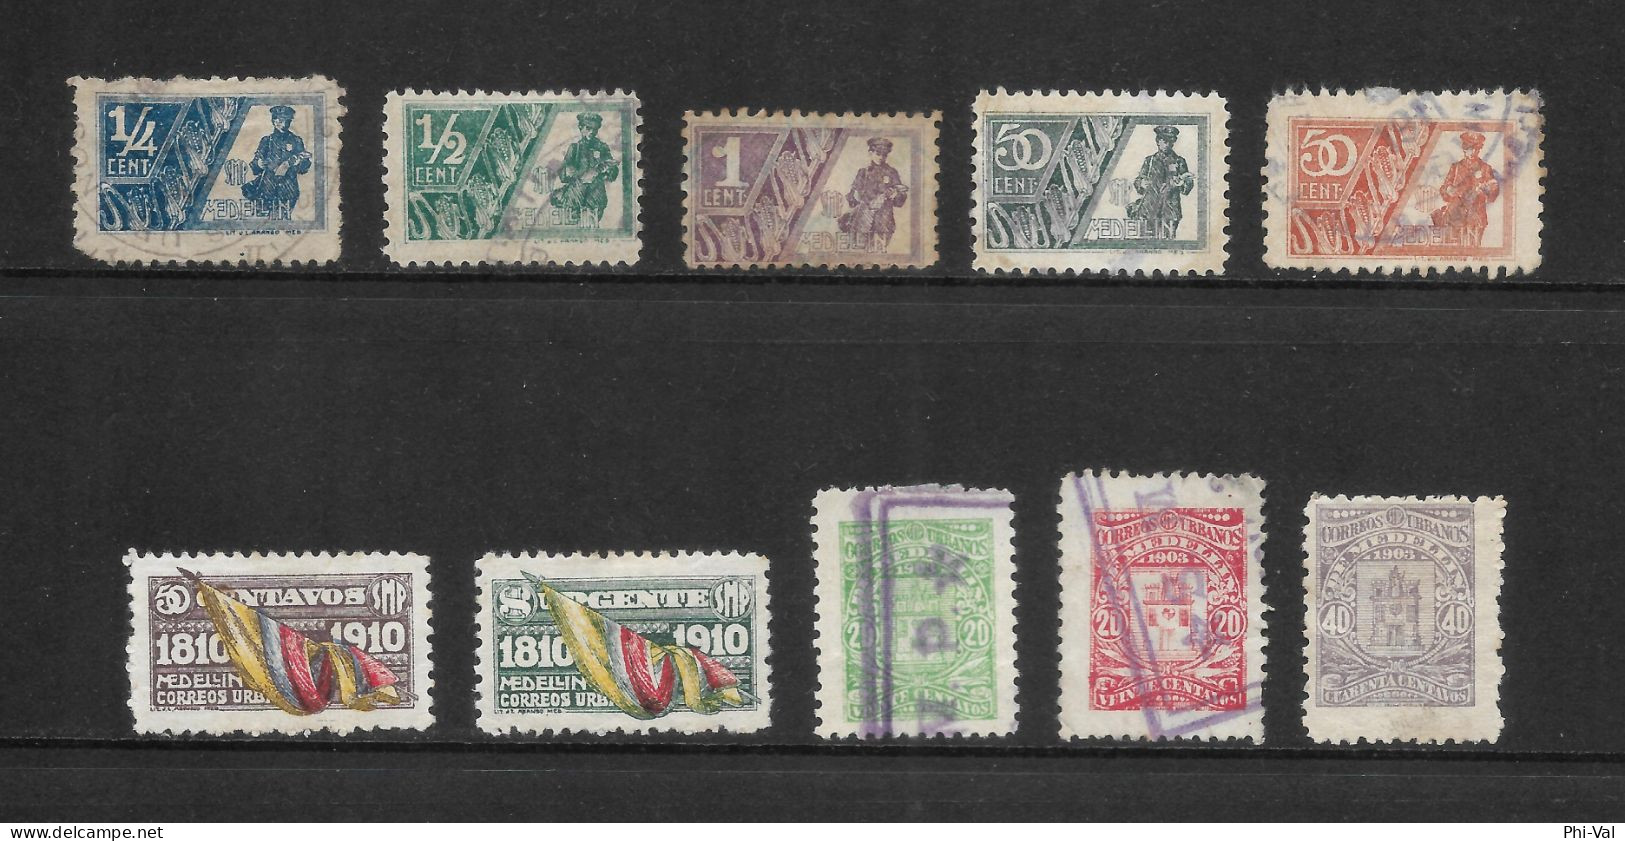 (LOT369) Colombia Medellin Urban Mail. 1903 - 1913. F VLH - Colombia